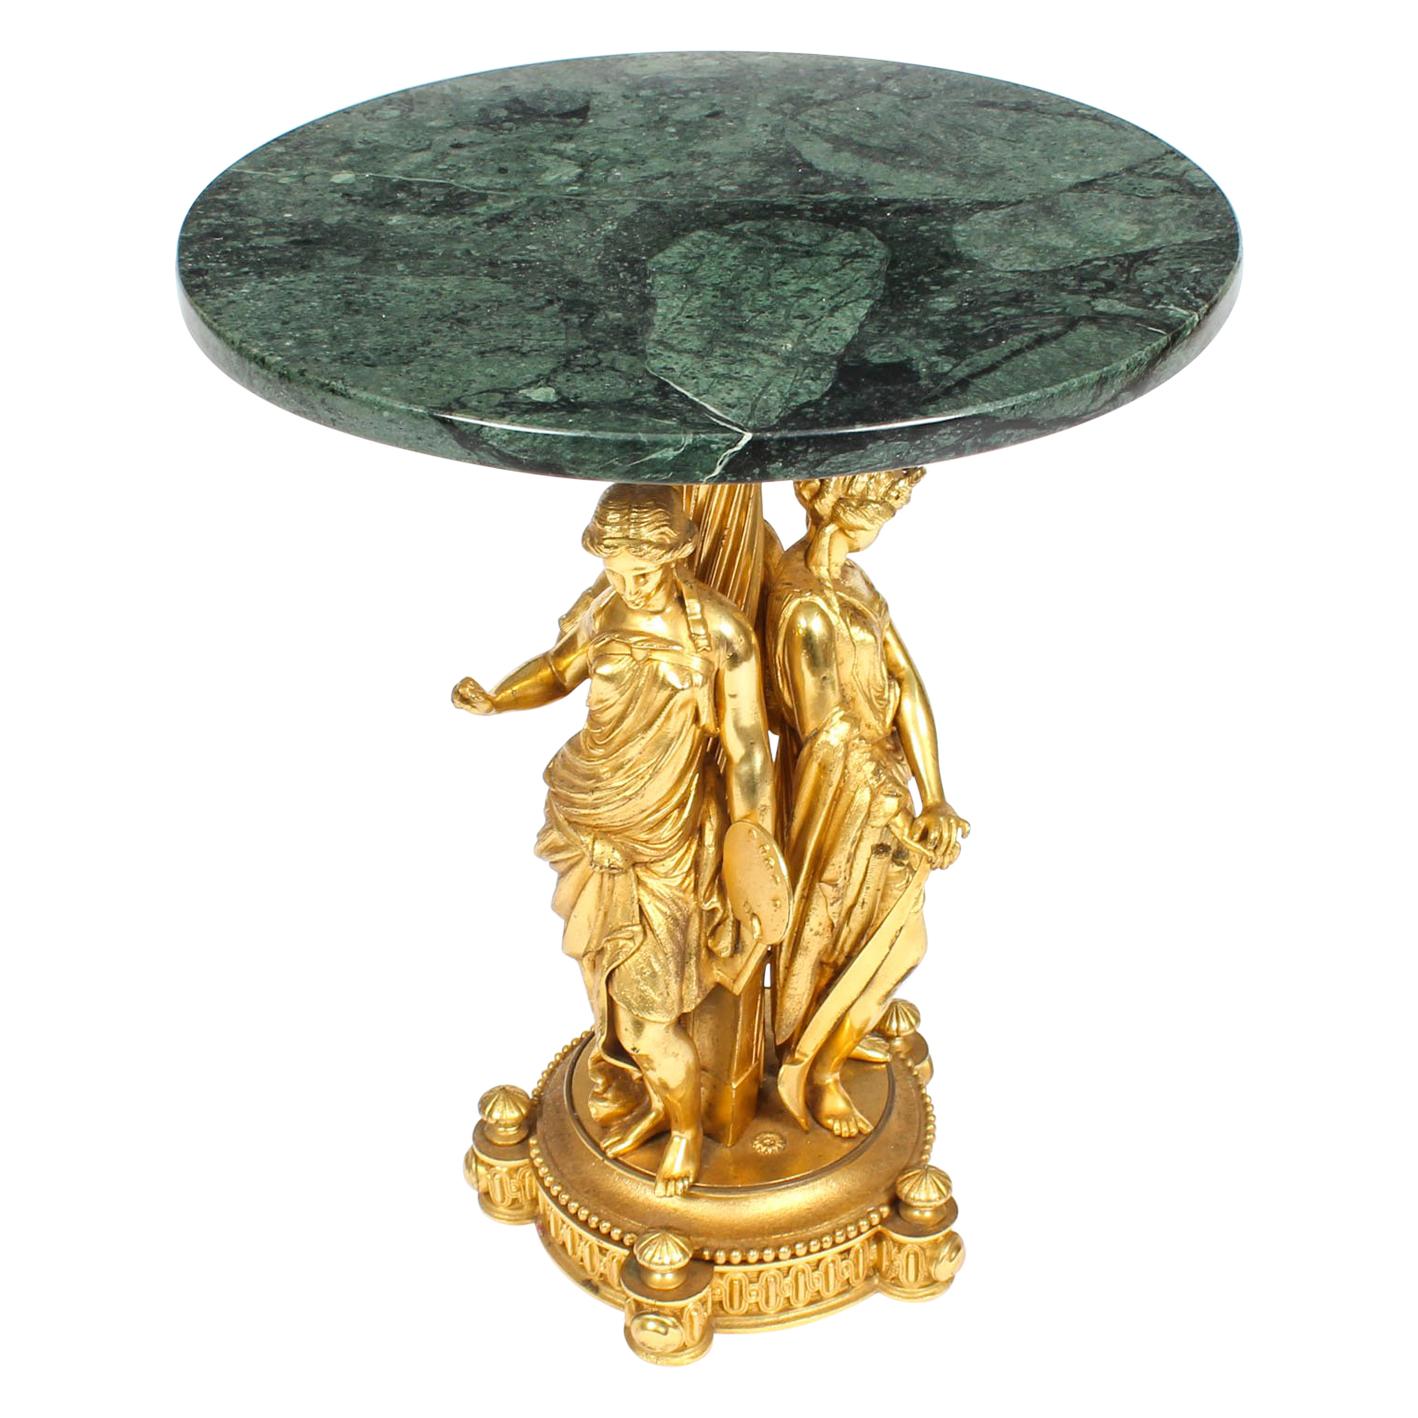 Antique Figural Group Ormolu and Marble Occasional Table 19th Century